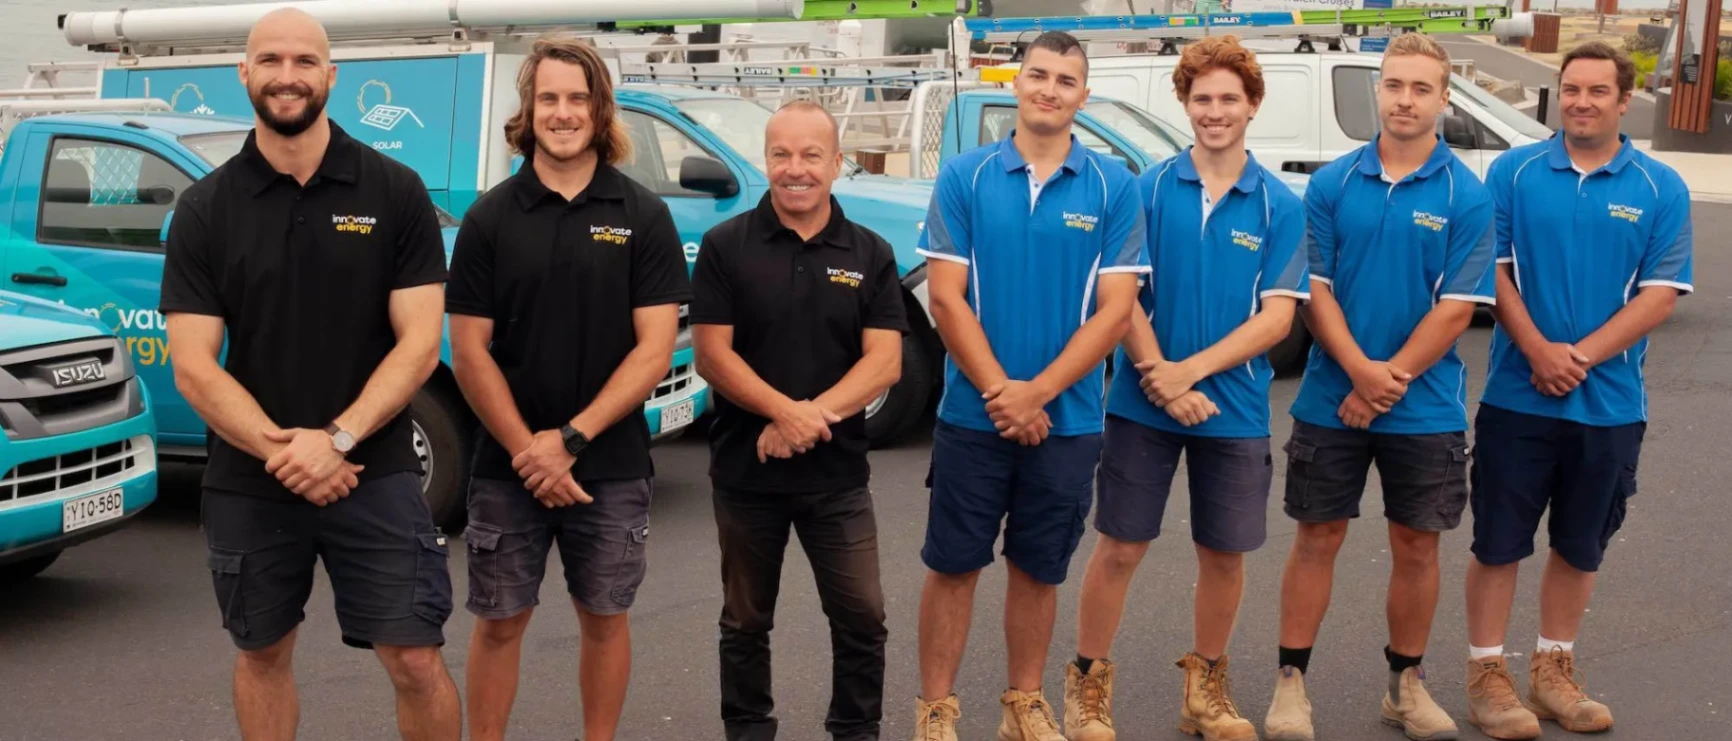 The Innovate Energy team of electricians all in branded uniform, smiling in front of branded utes